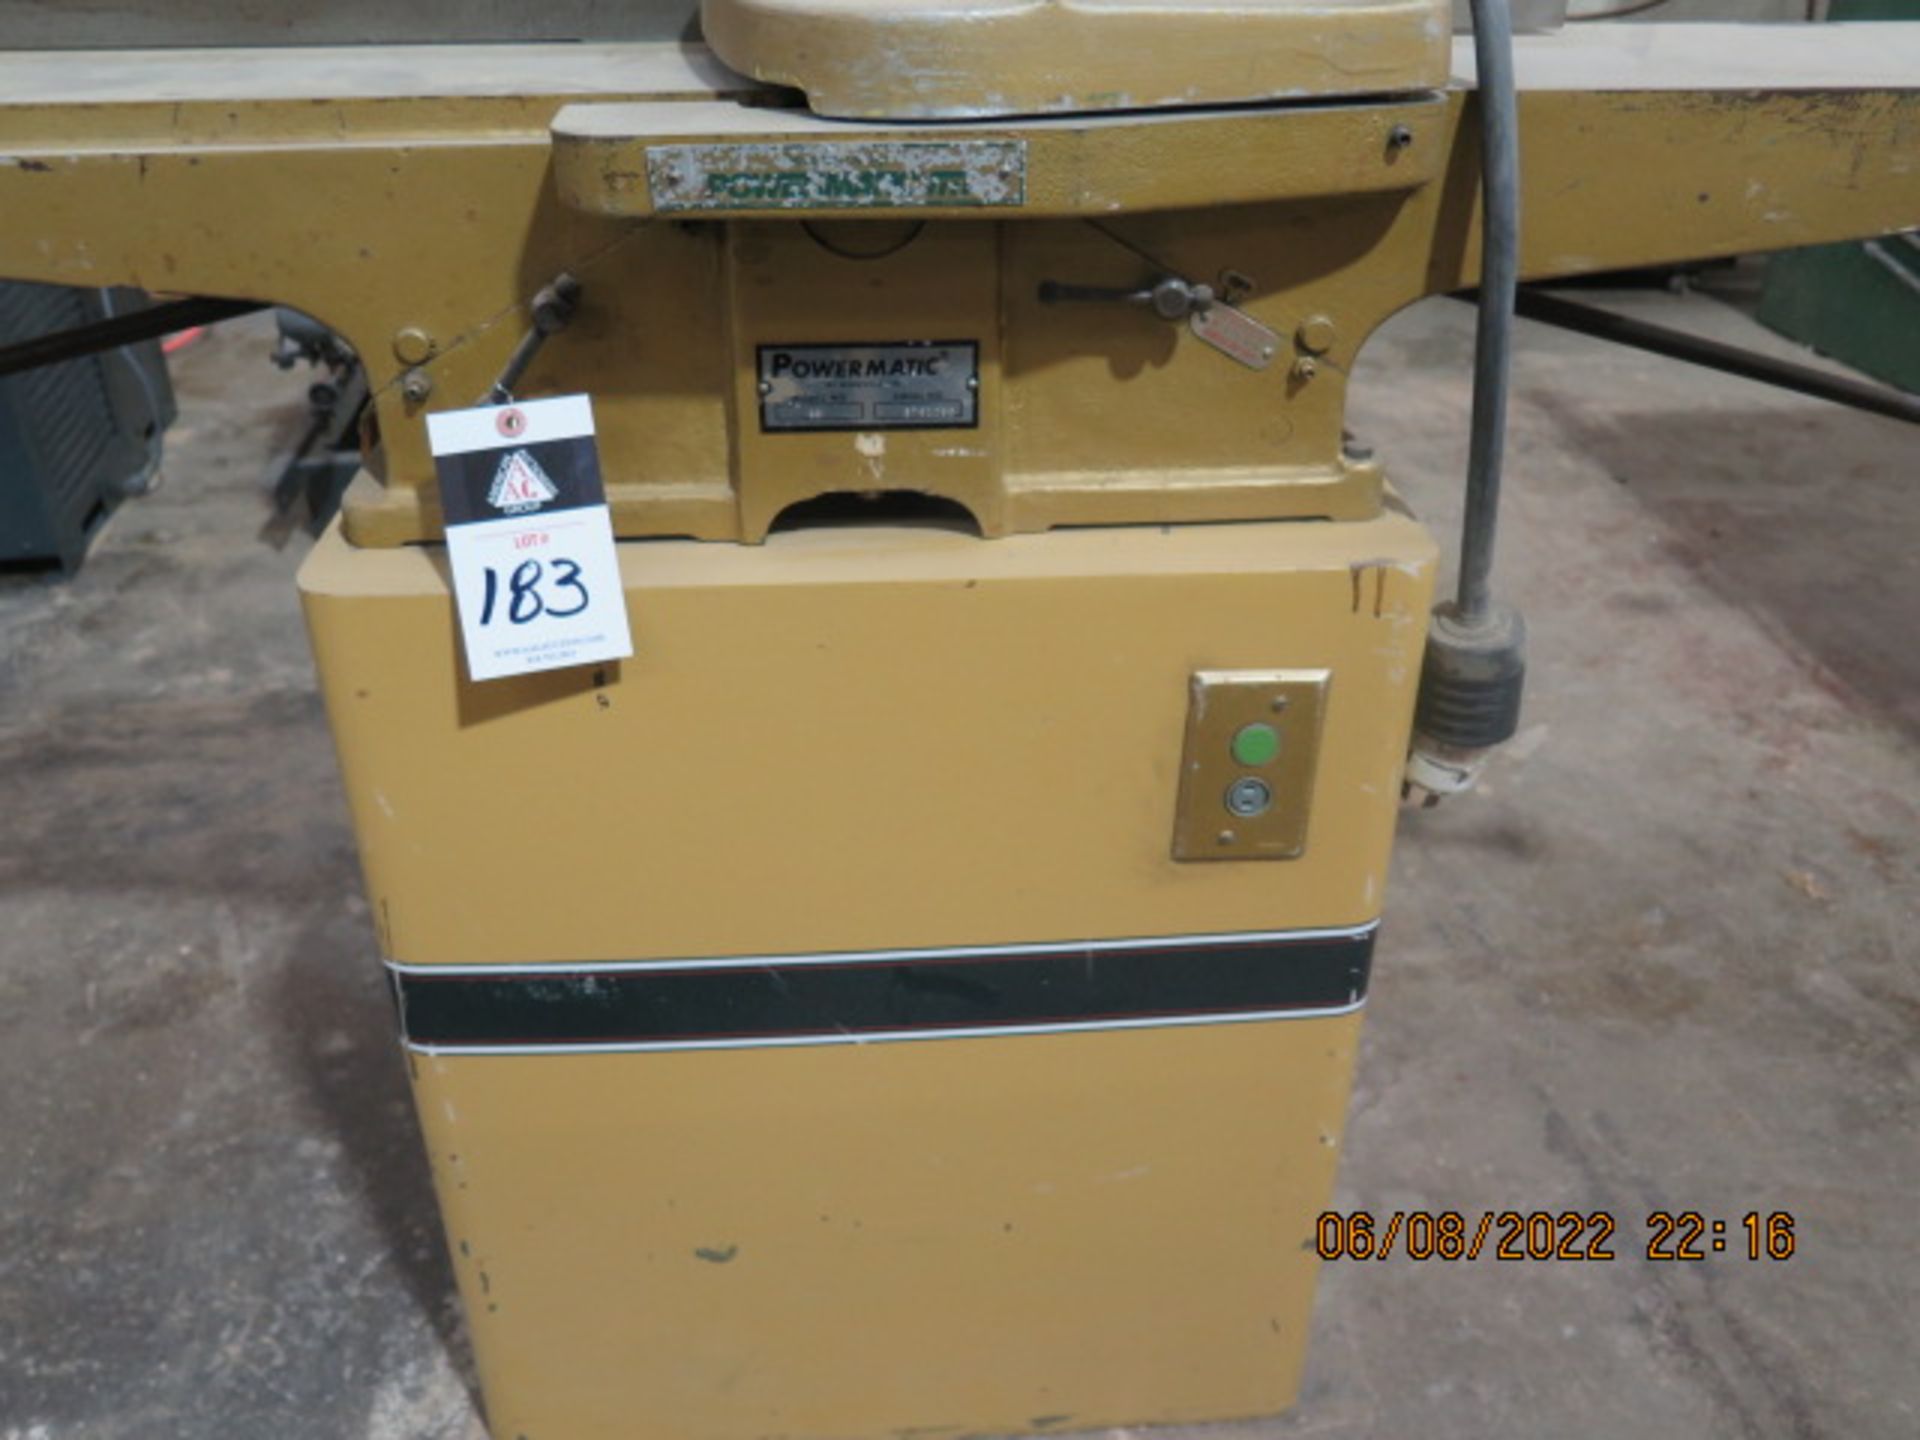 Powermatic mdl. 60 8” Jointer s/n 8761069 (SOLD AS-IS - NO WARRANTY) - Image 6 of 7